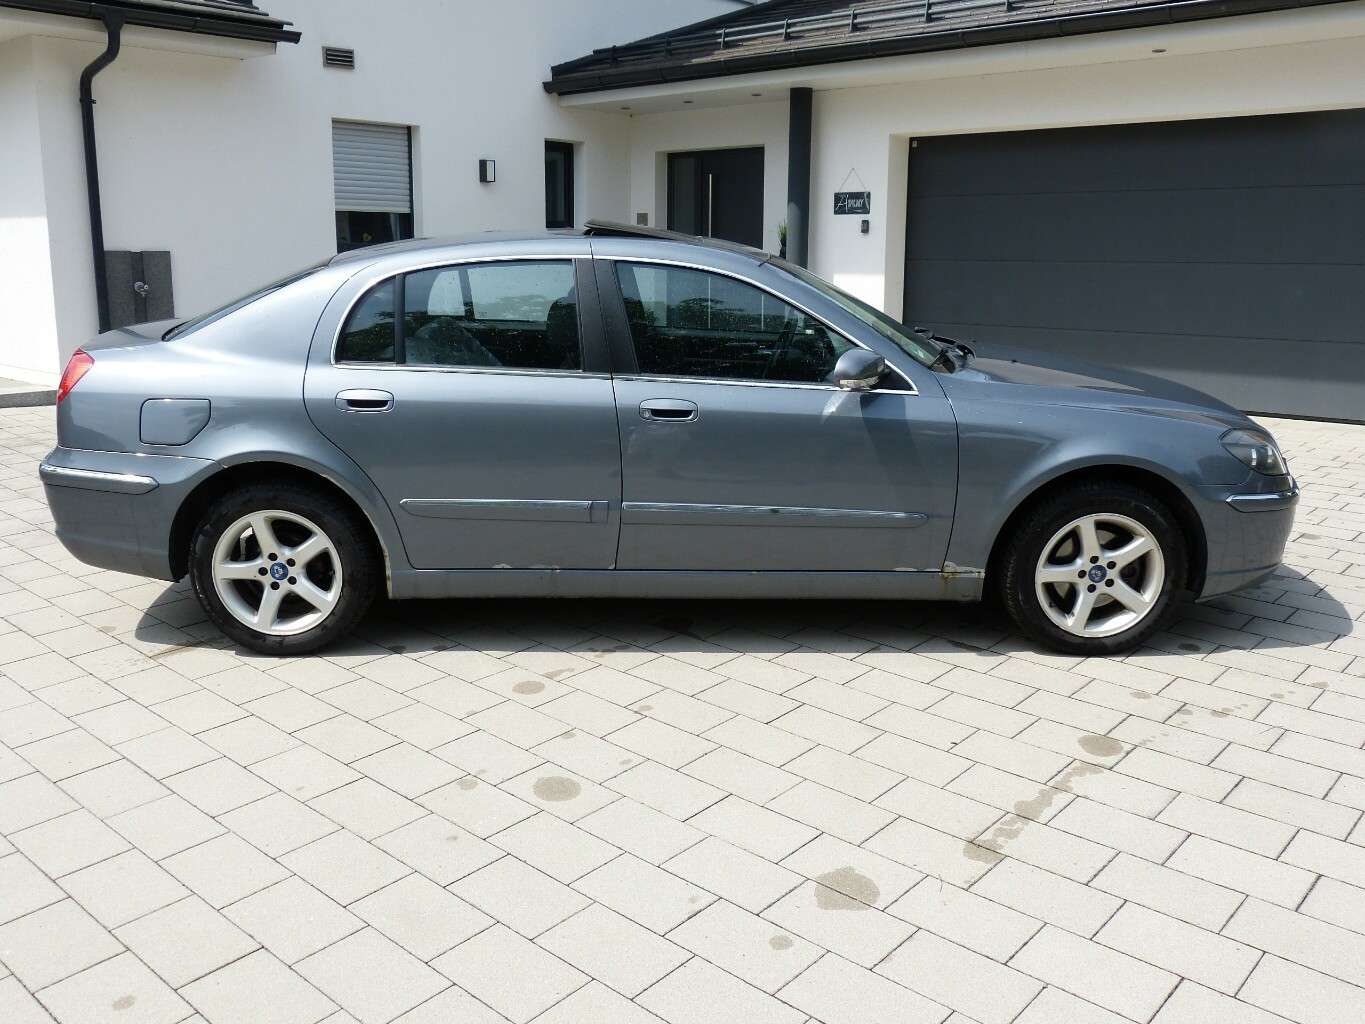 Brilliance BS4 Sedan in Grey used in Oberviechtach for € 2,599.-